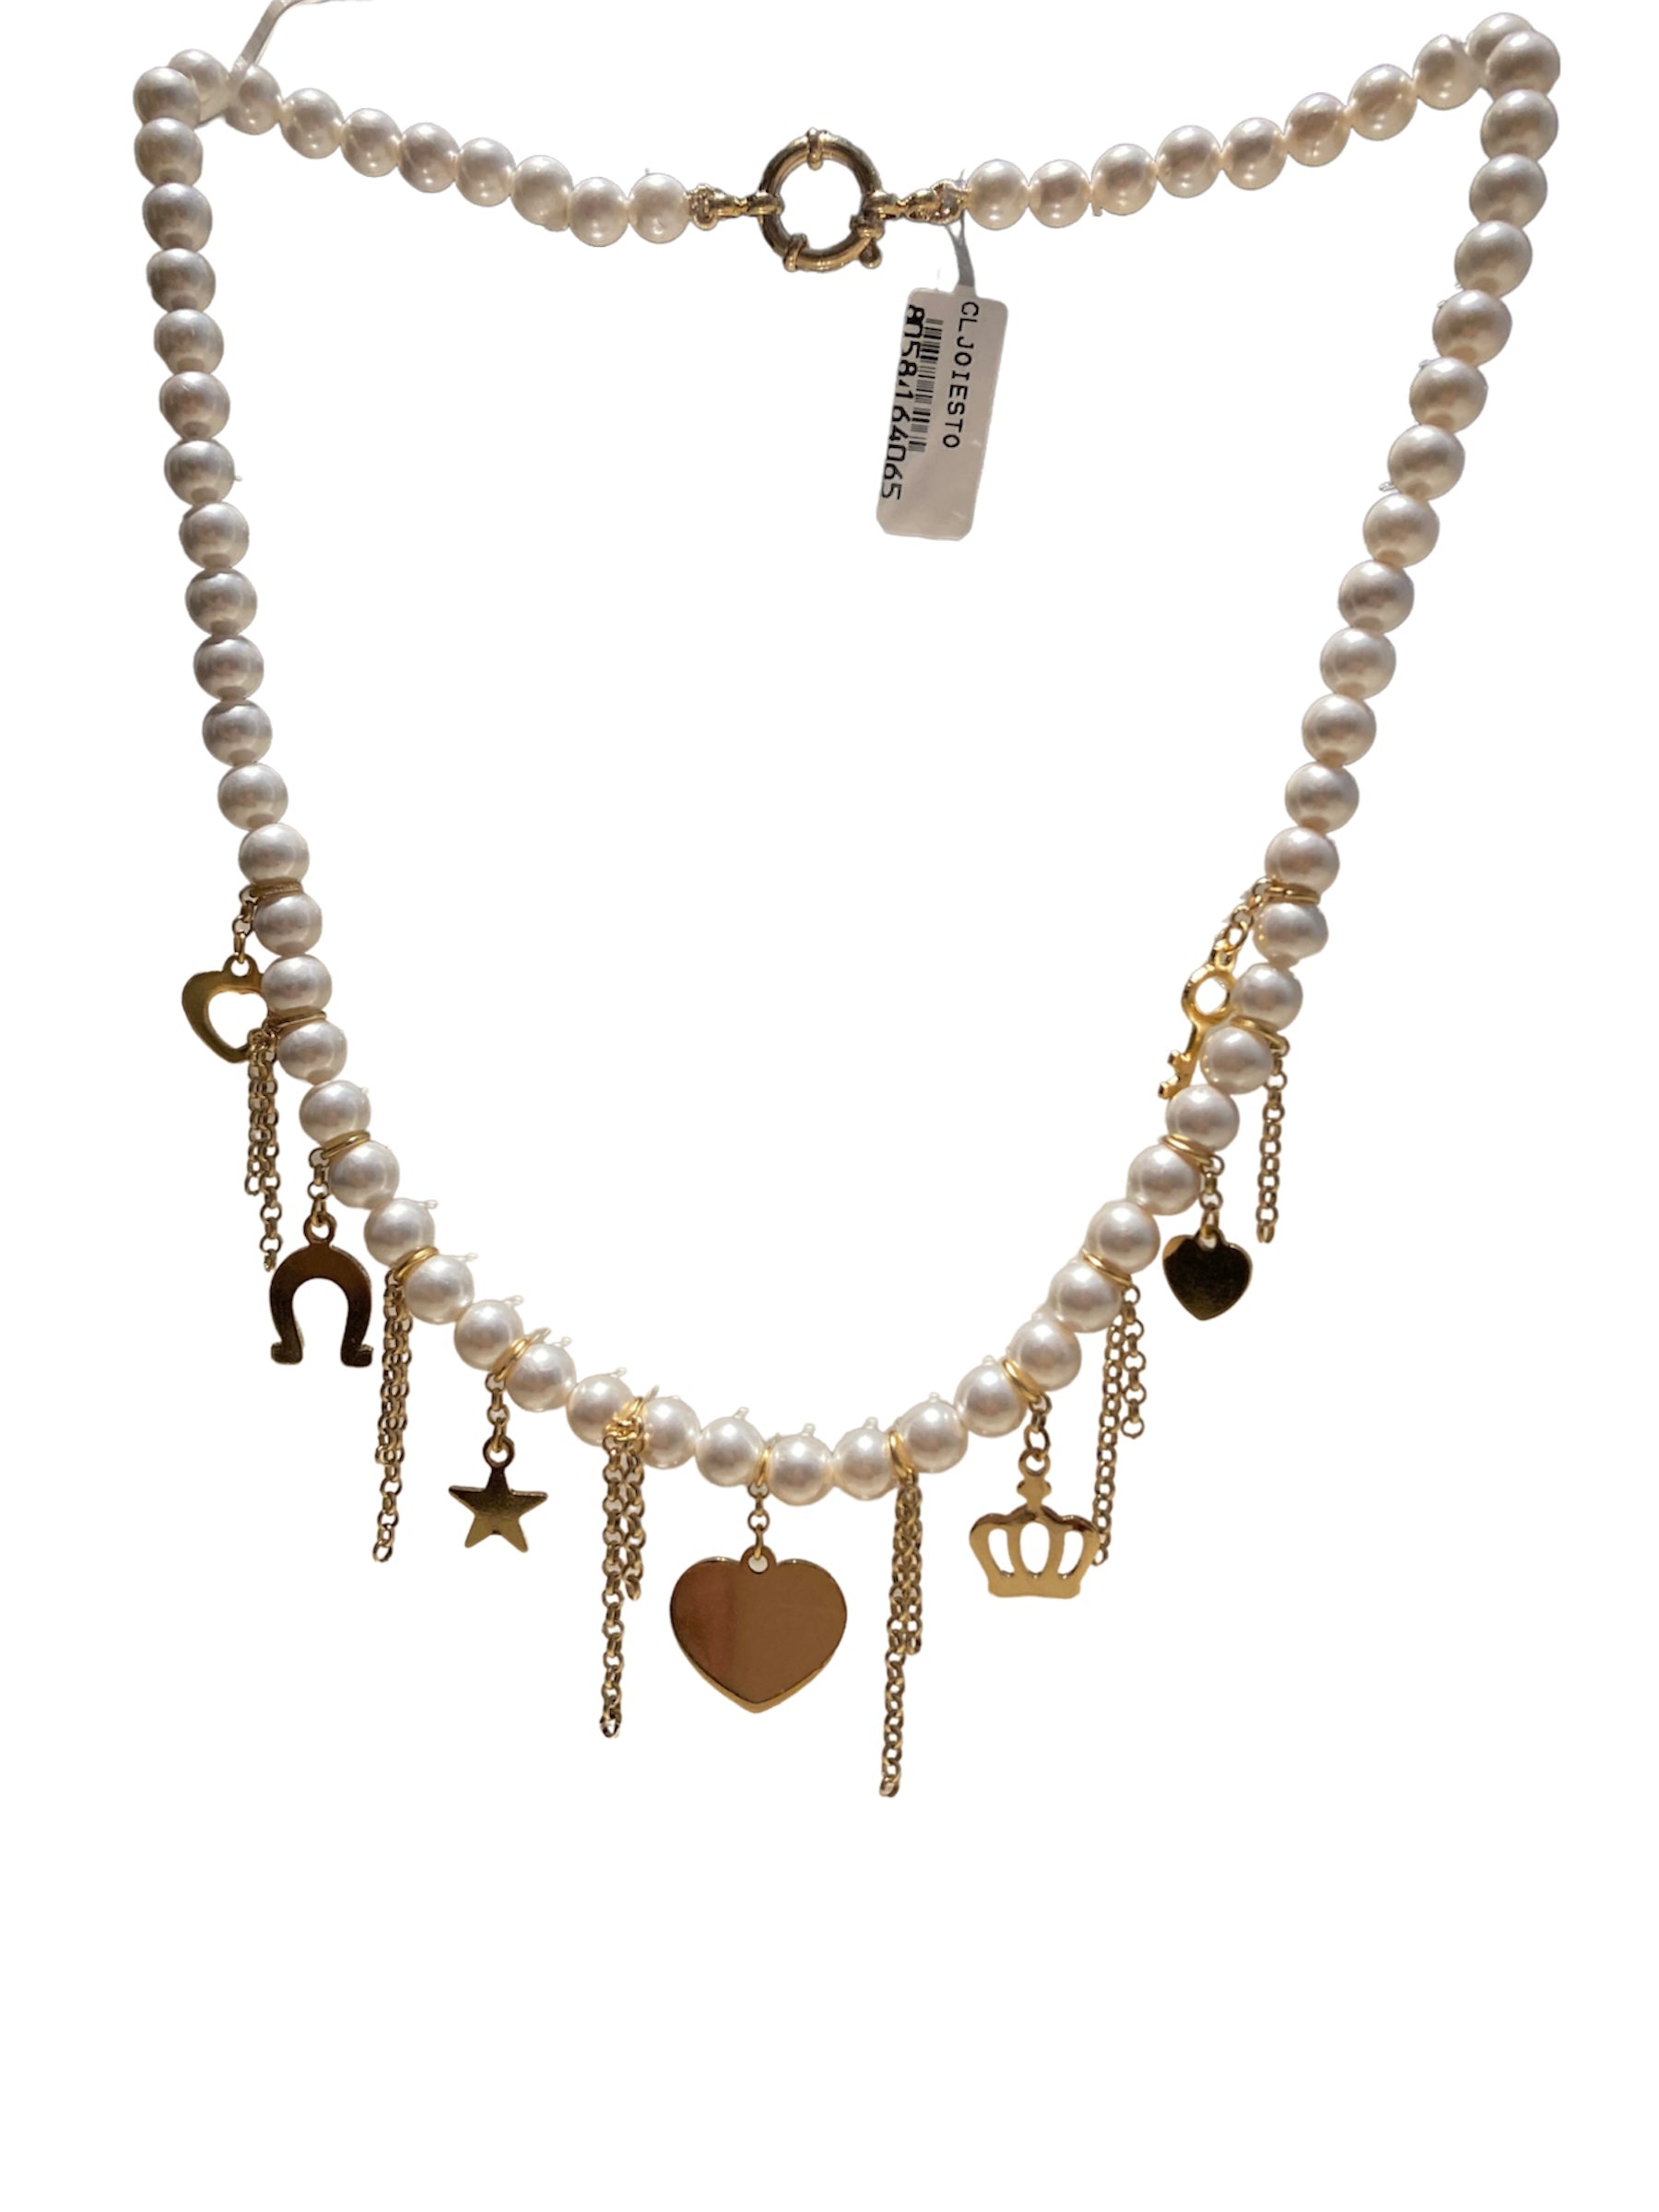 Le Carose, Beaded Chain with Pendants